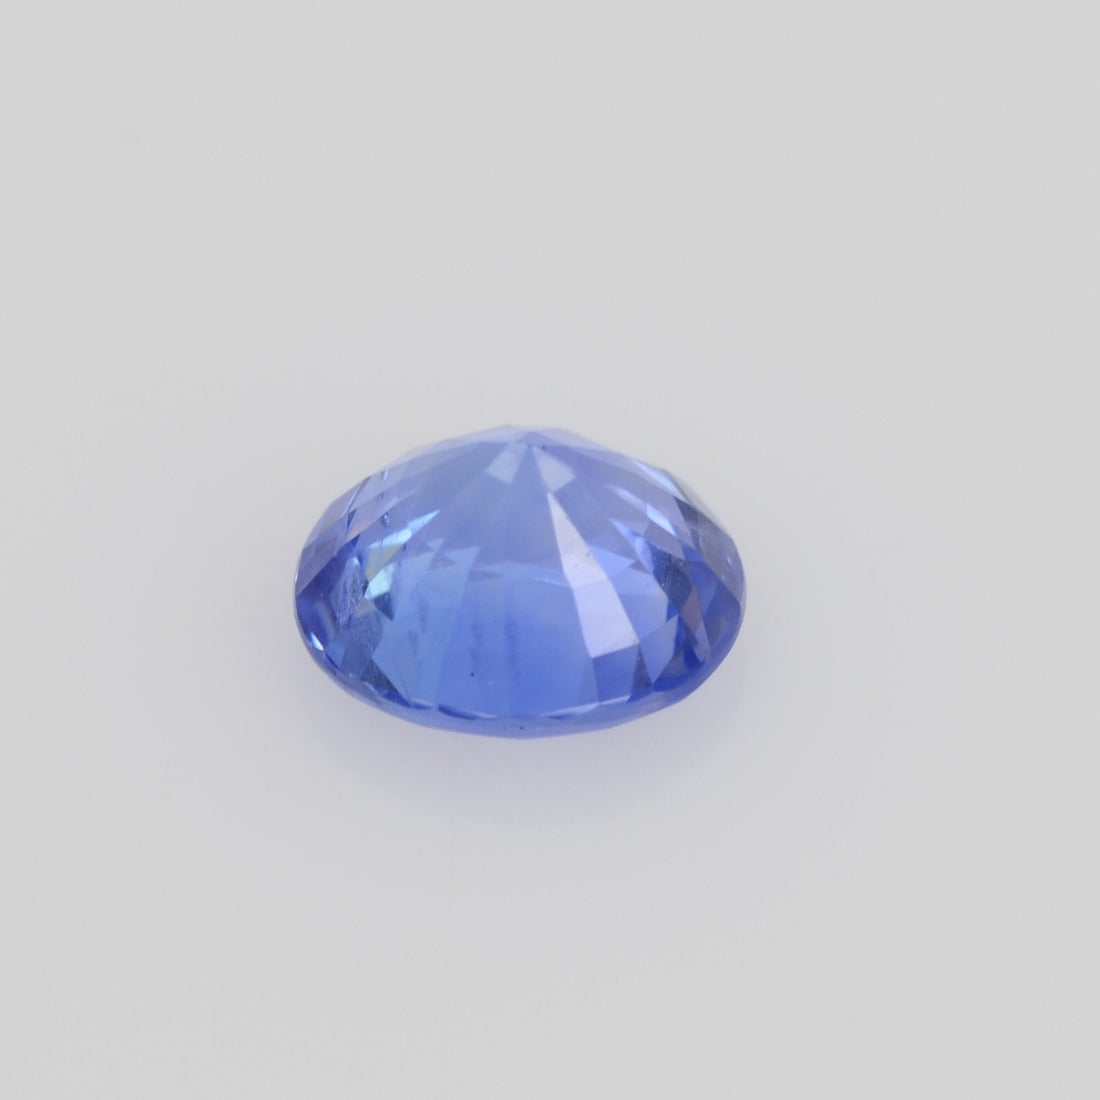 0.48-0.56 cts Natural Blue Sapphire Loose Gemstone Oval Cut